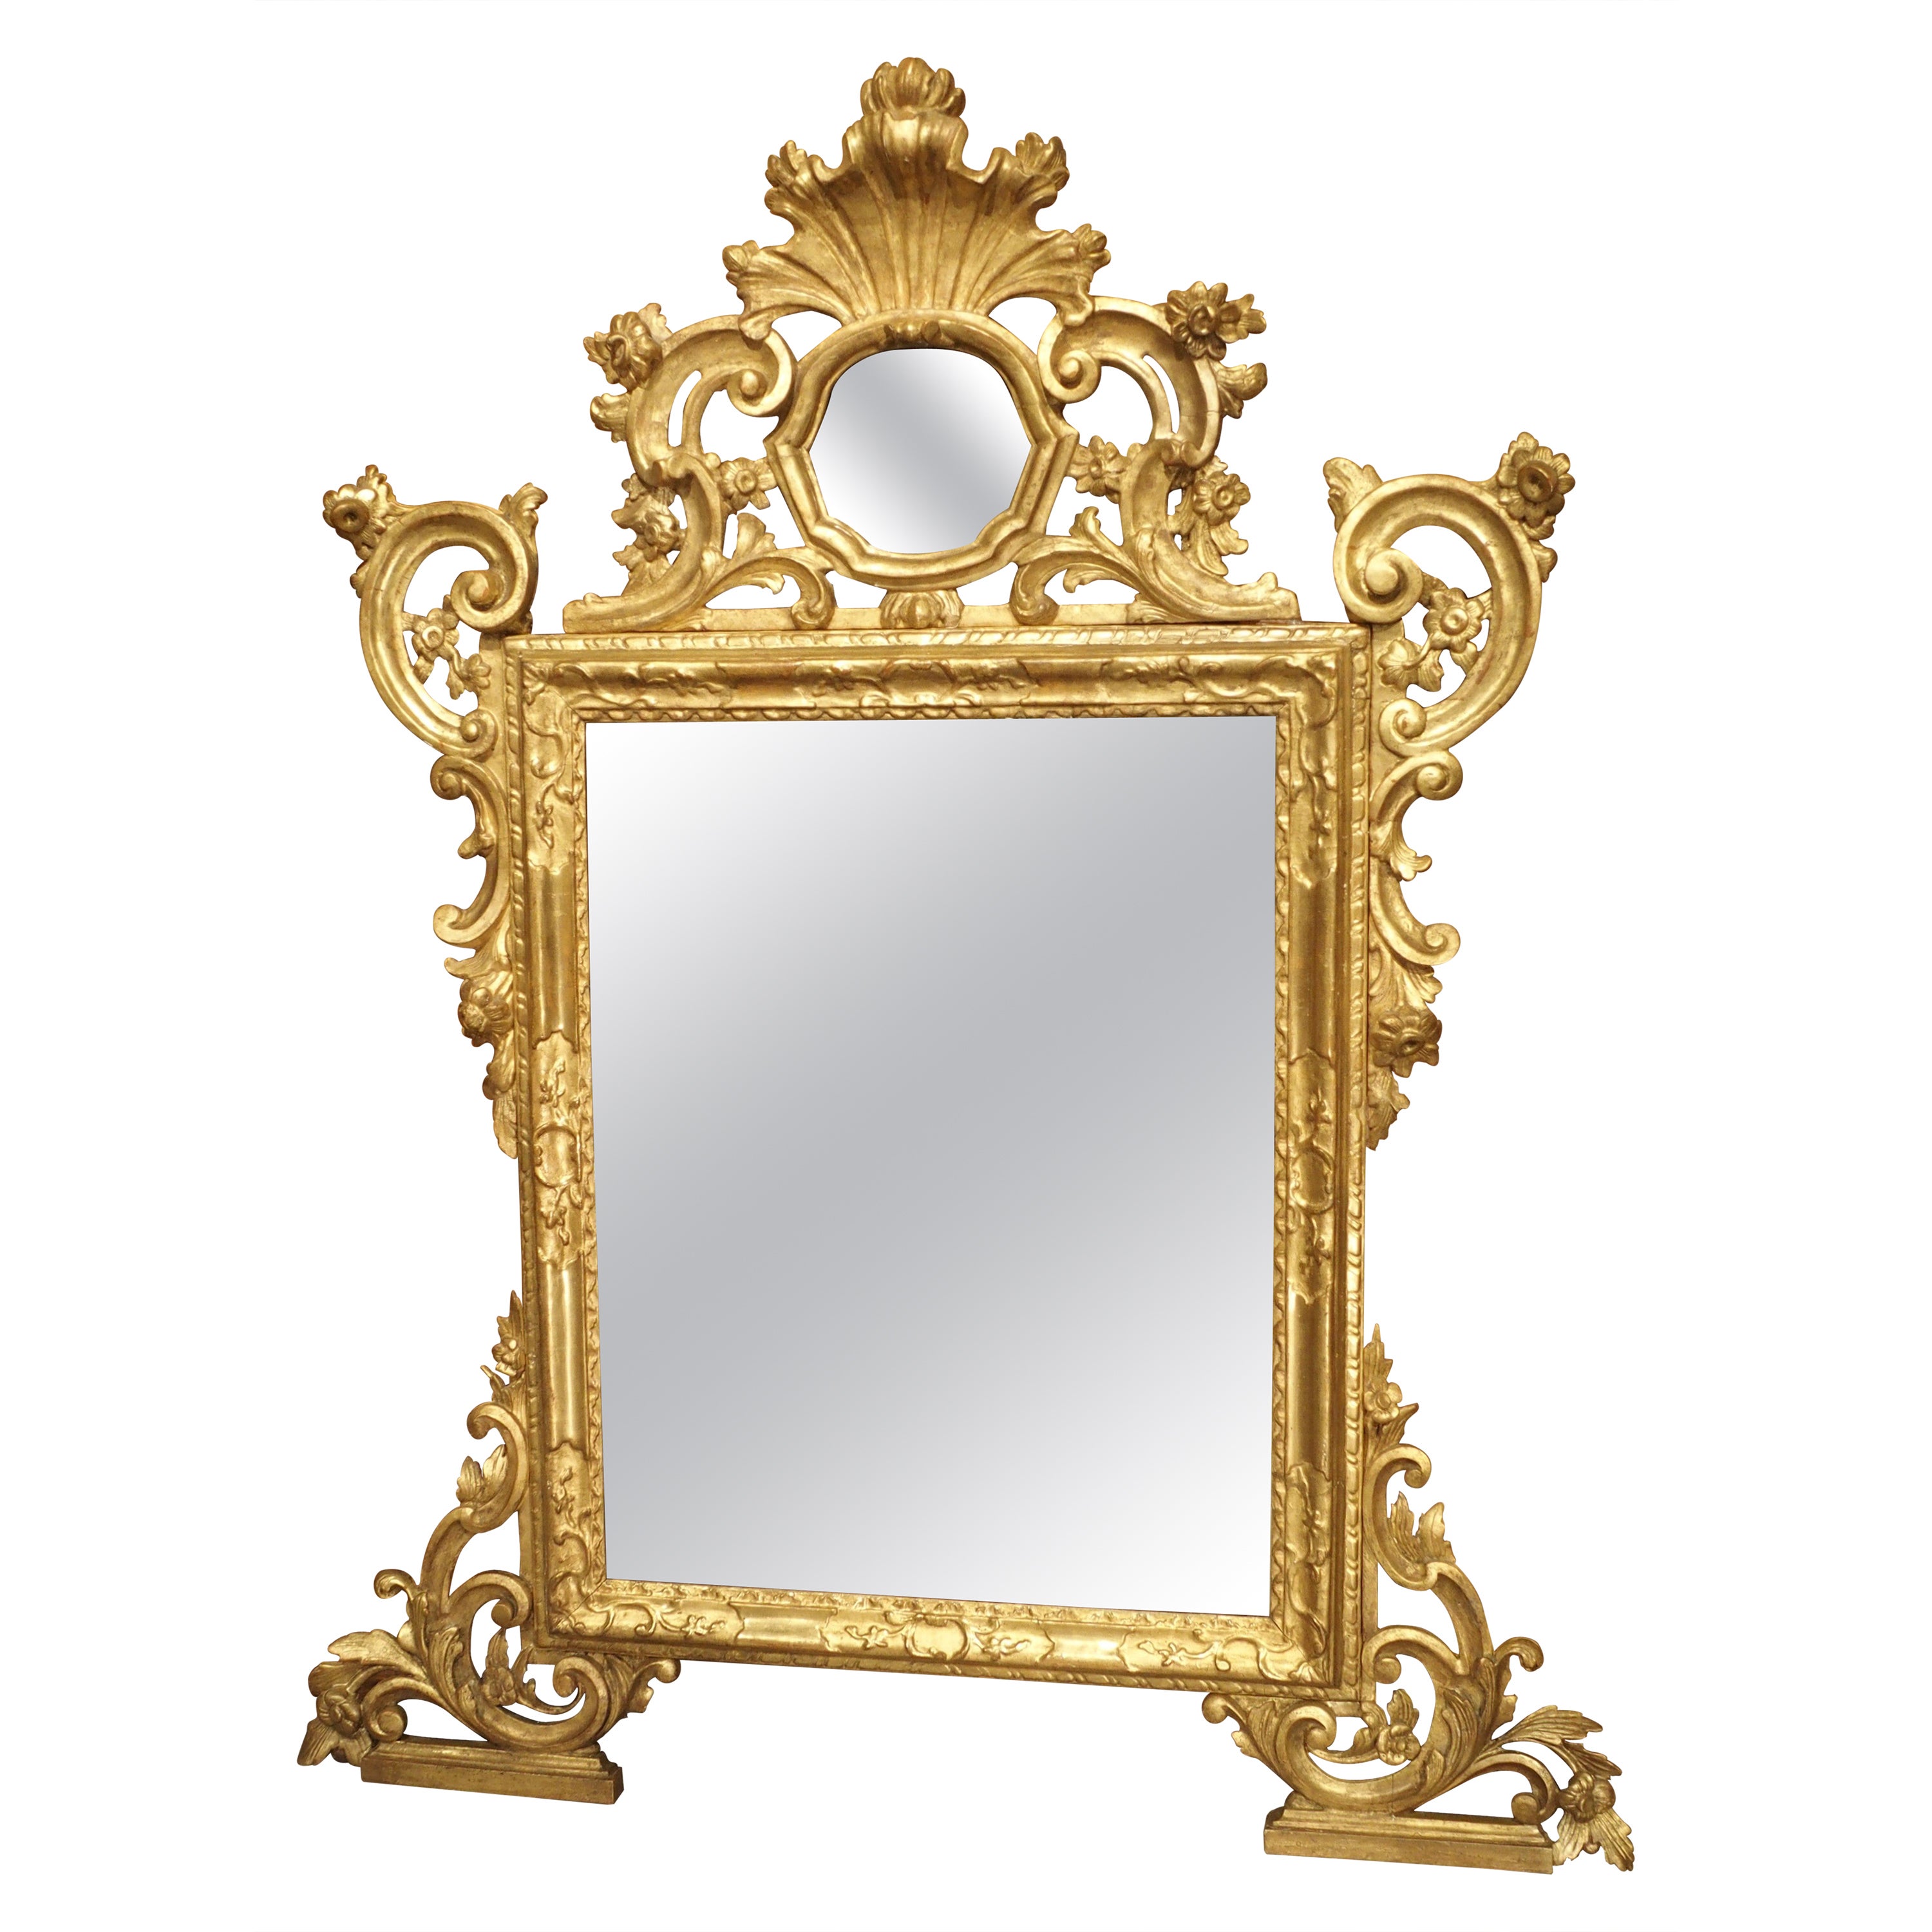 Richly Carved Antique Venetian Giltwood Mirror, Circa 1850